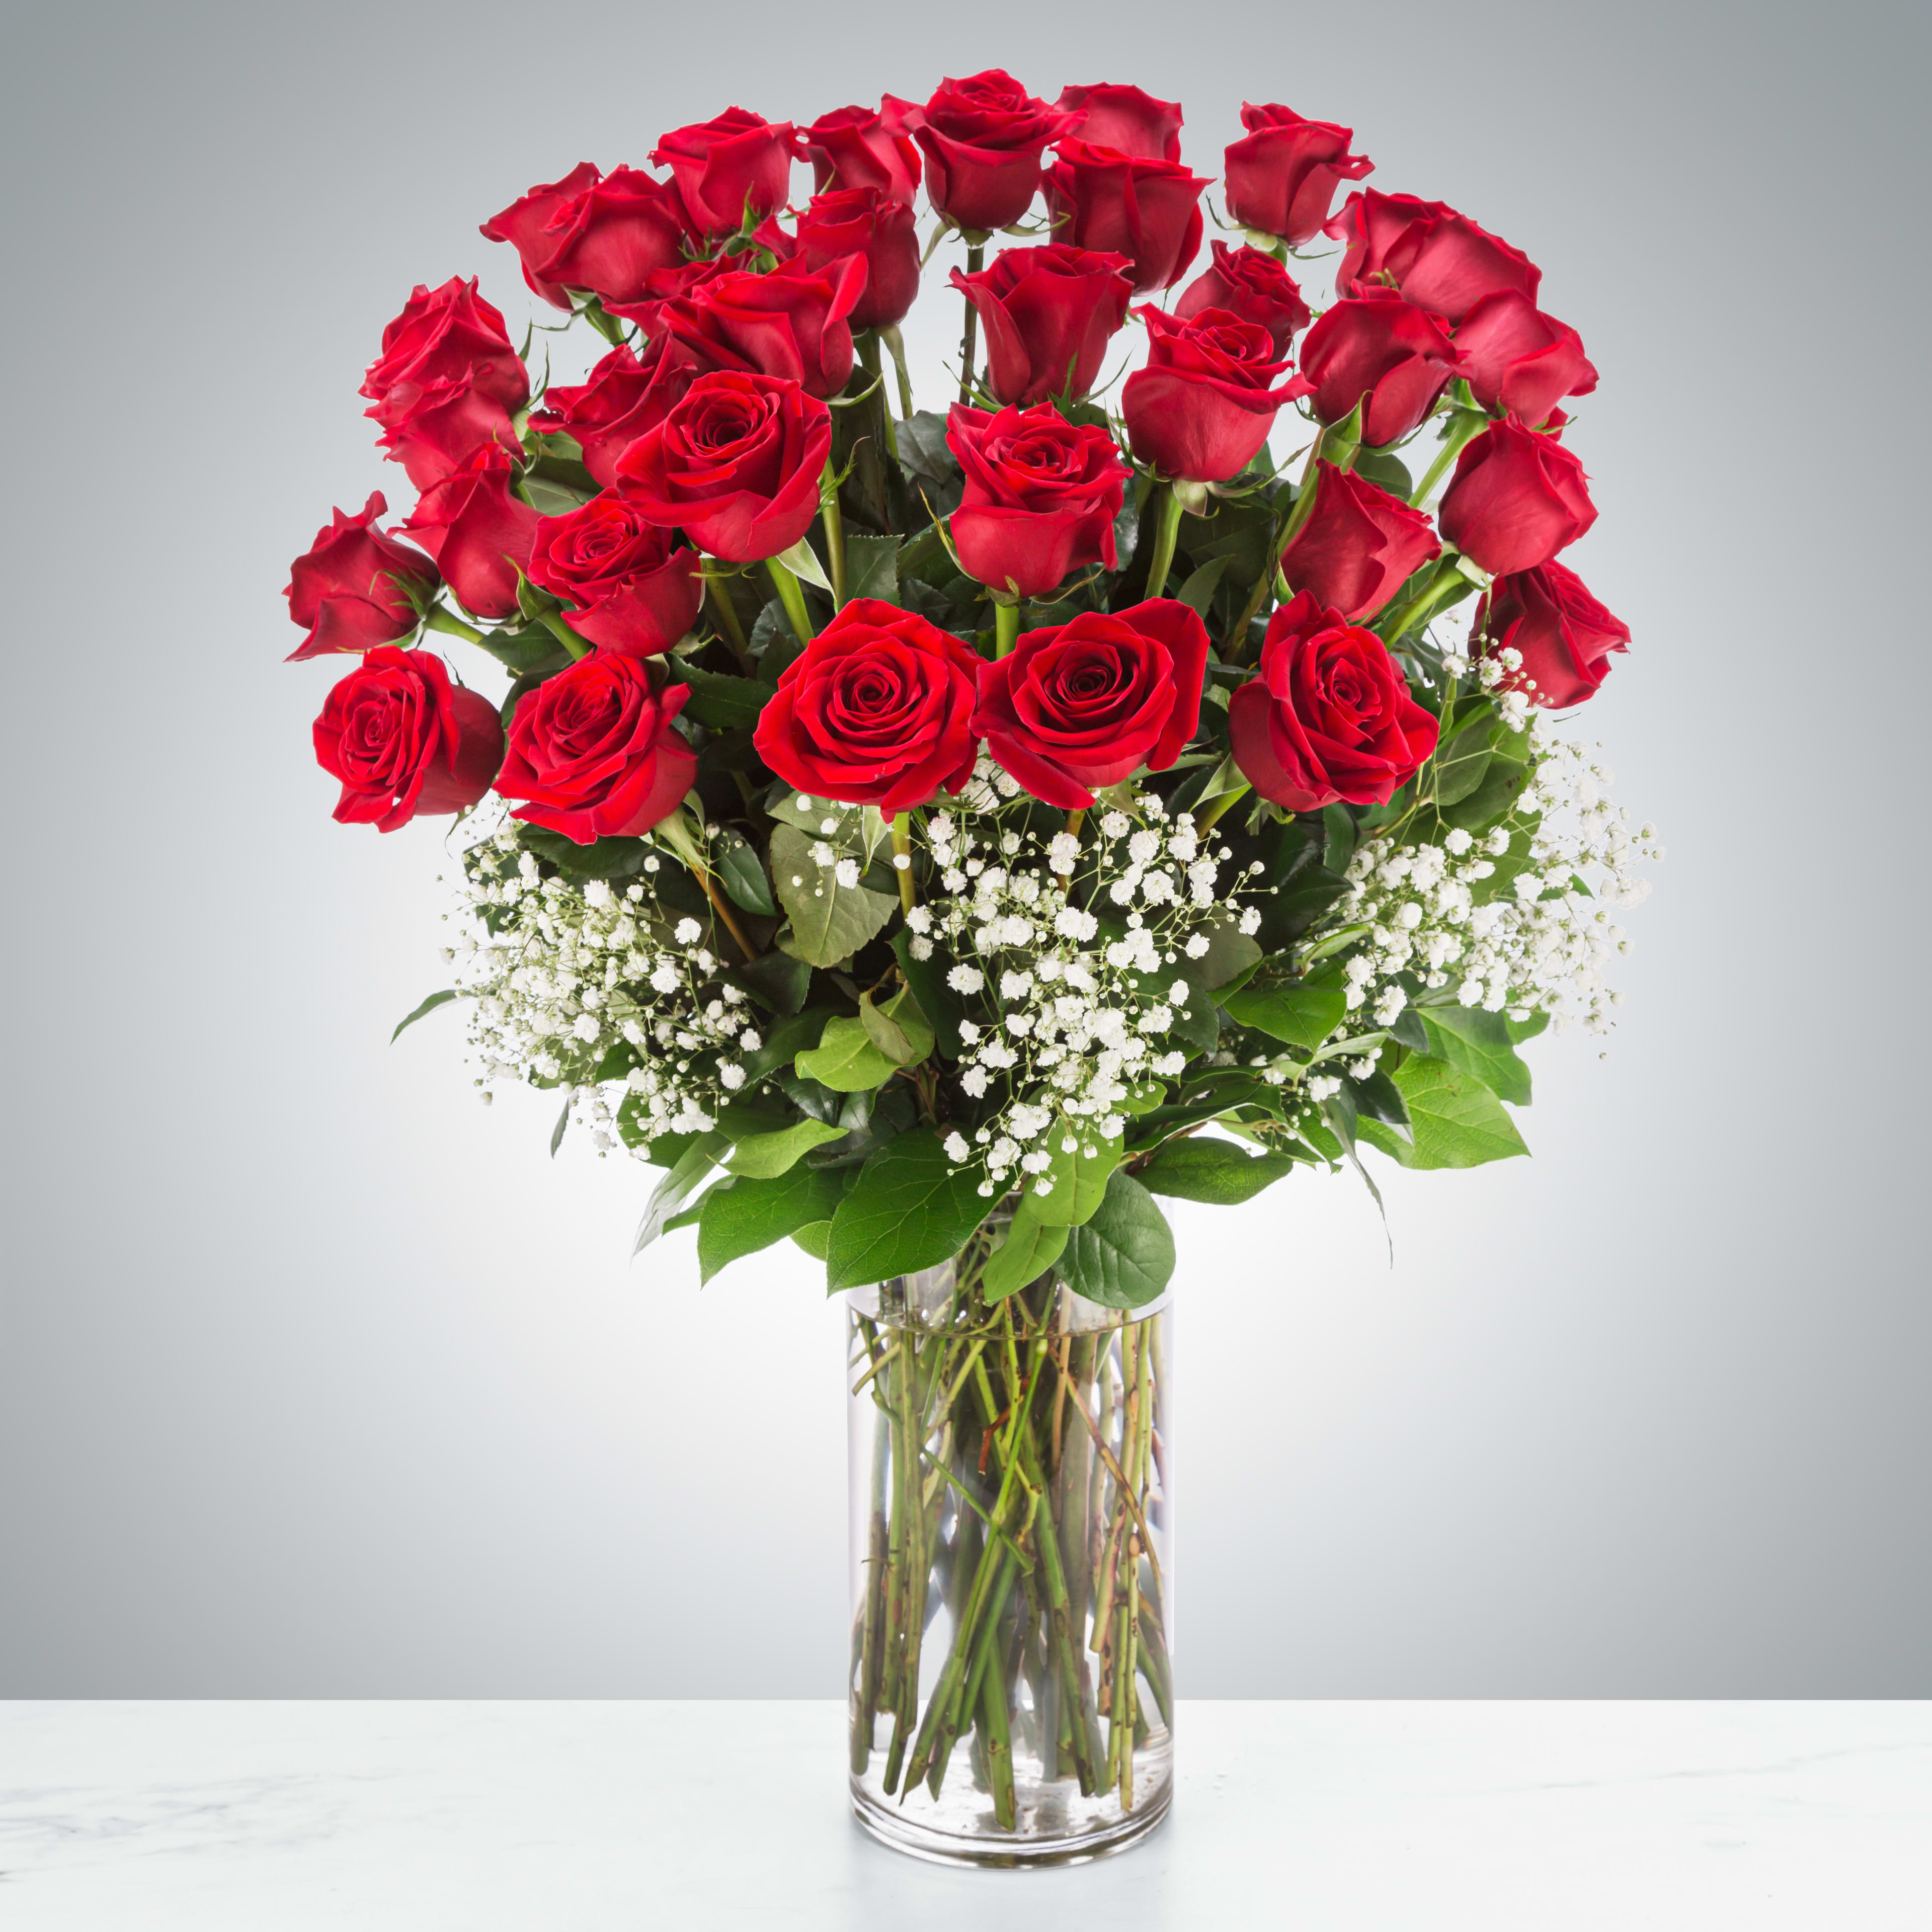 Grandeur Long Stem Rose - Go big with your love. Send the most extravagant 3 dozen red rose arrangement for Valentine's day, anniversary celebrations, or declarations of love. This luxury arrangement makes a big statement of &quot;I love you&quot; in 36 roses. 